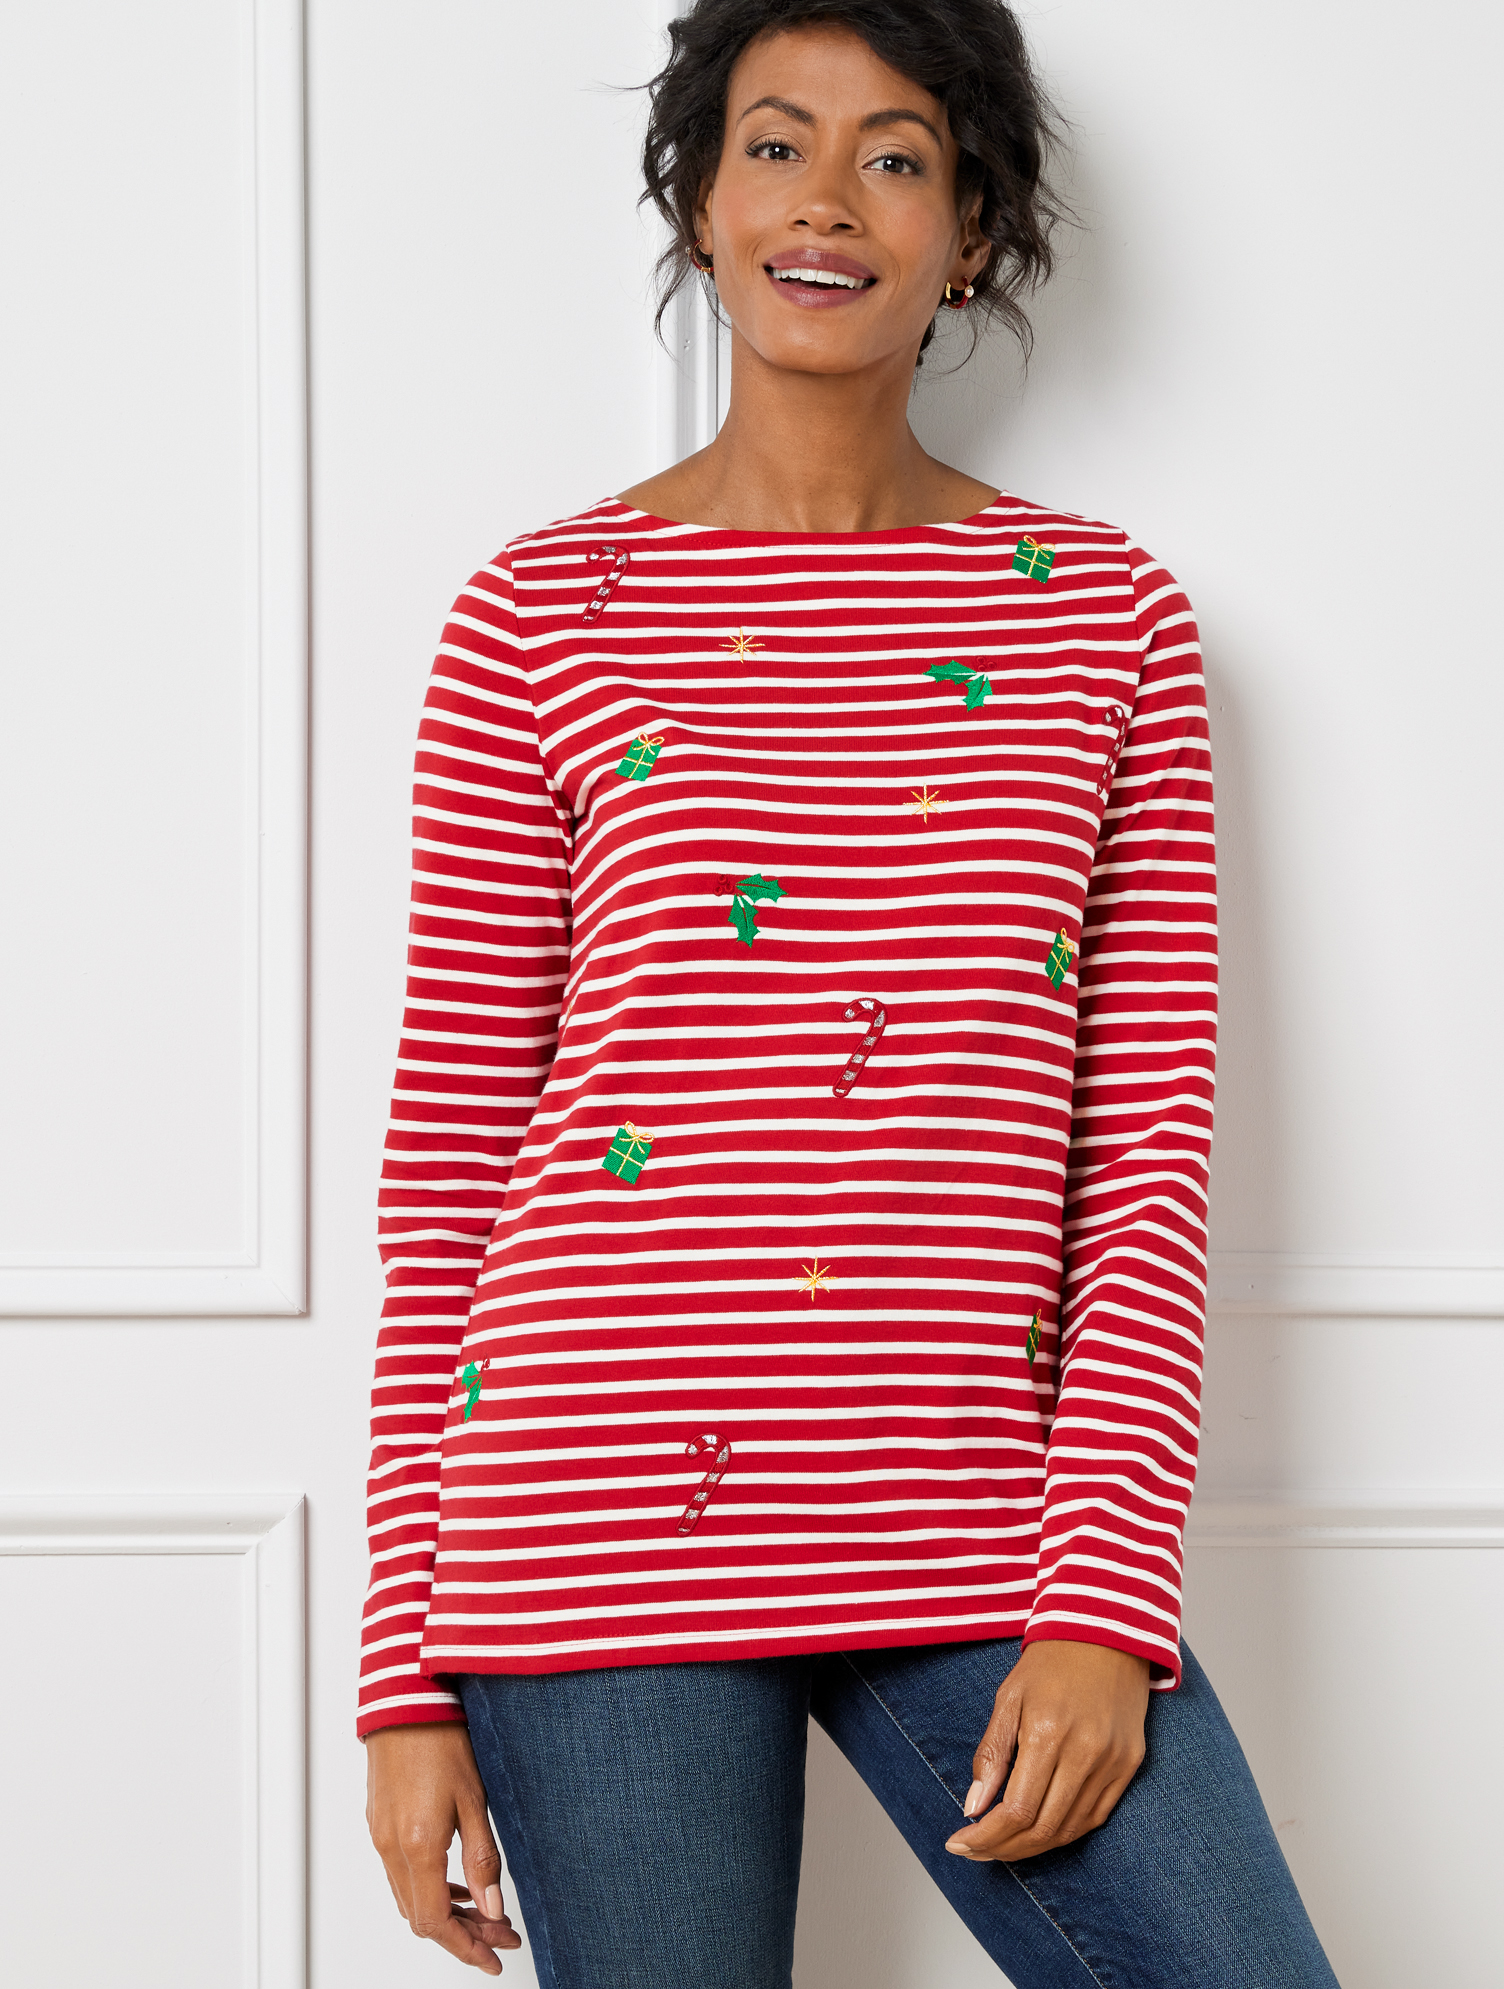 Talbots Petite - Embroidered Bateau Neck T-shirt - Holiday Icons - Red/ivory - Medium - 100% Cotton  In Red,ivory